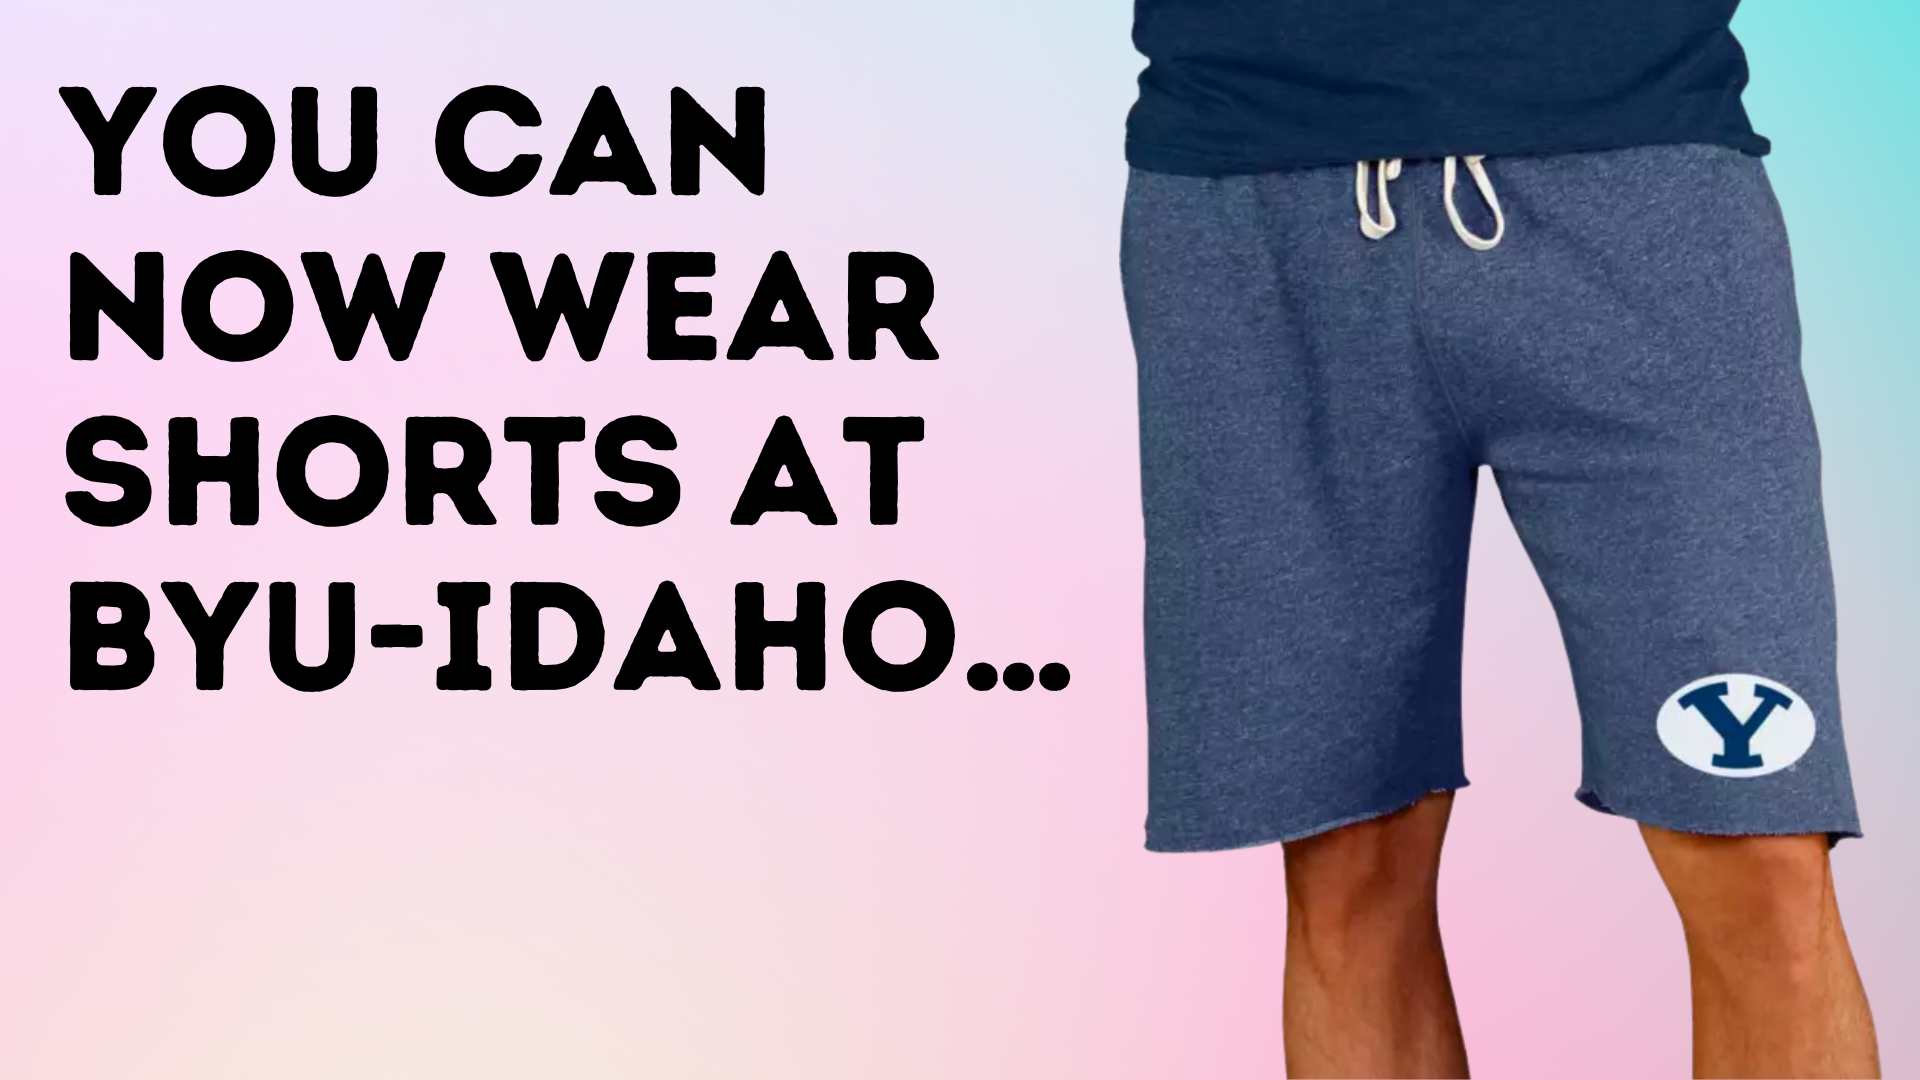 You Can Now Wear Shorts at BYU-Idaho…